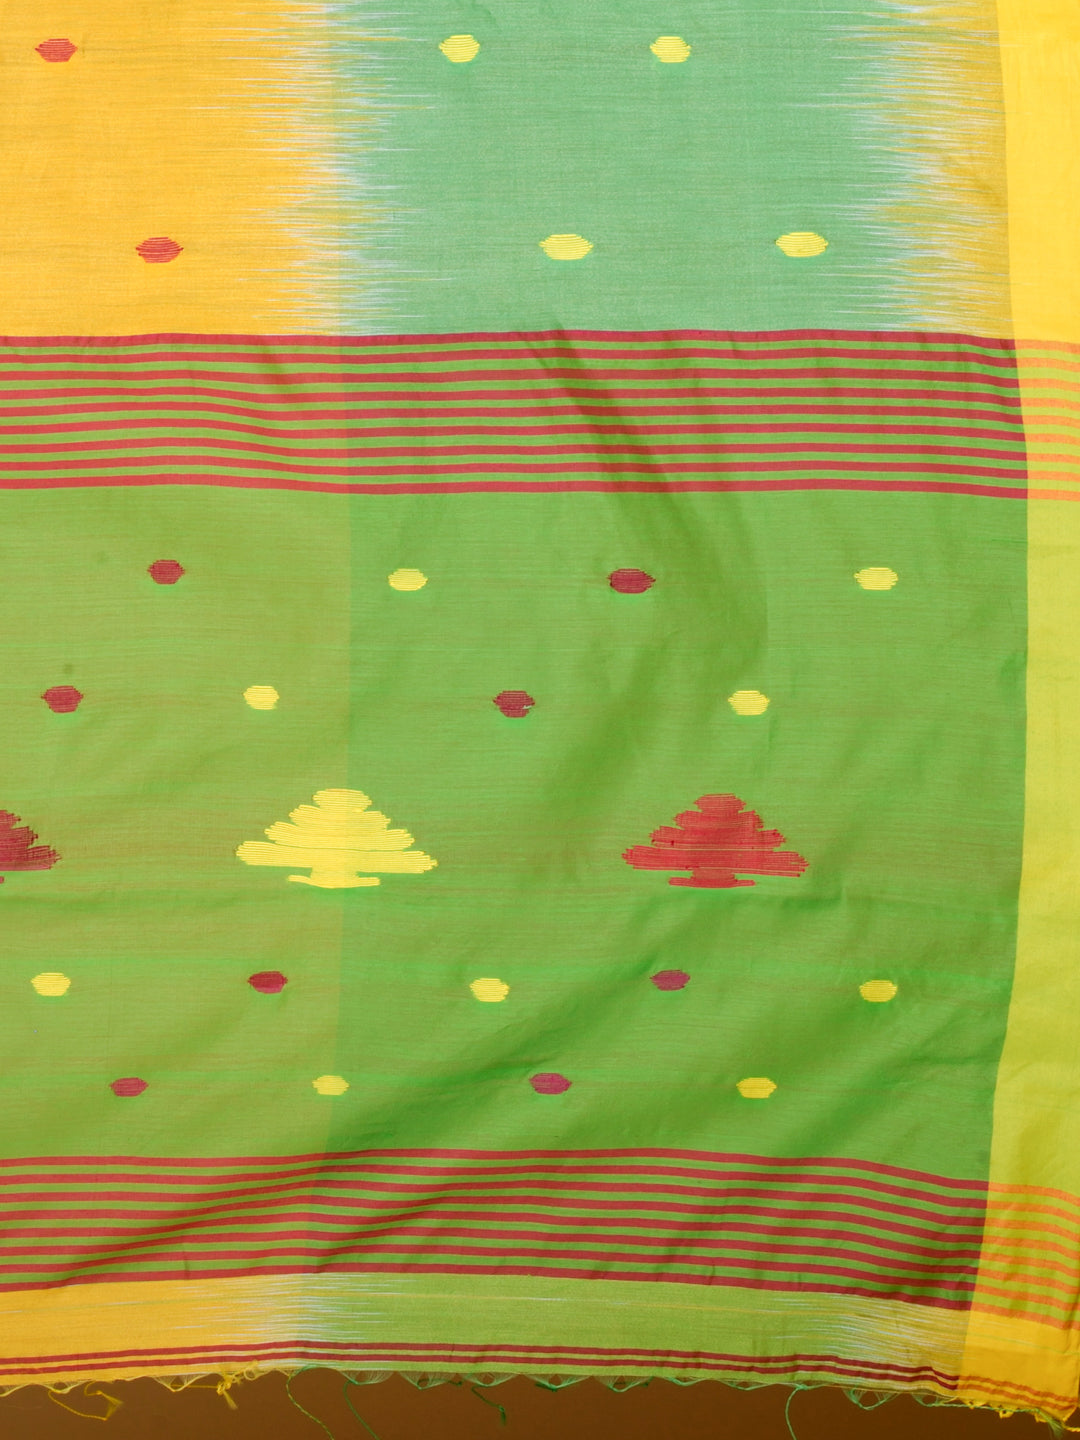 Women's Green & Yellow Blended Cotton Handwoven Soft Saree With Ikkat Design With Unstitched Blouse-Sajasajo